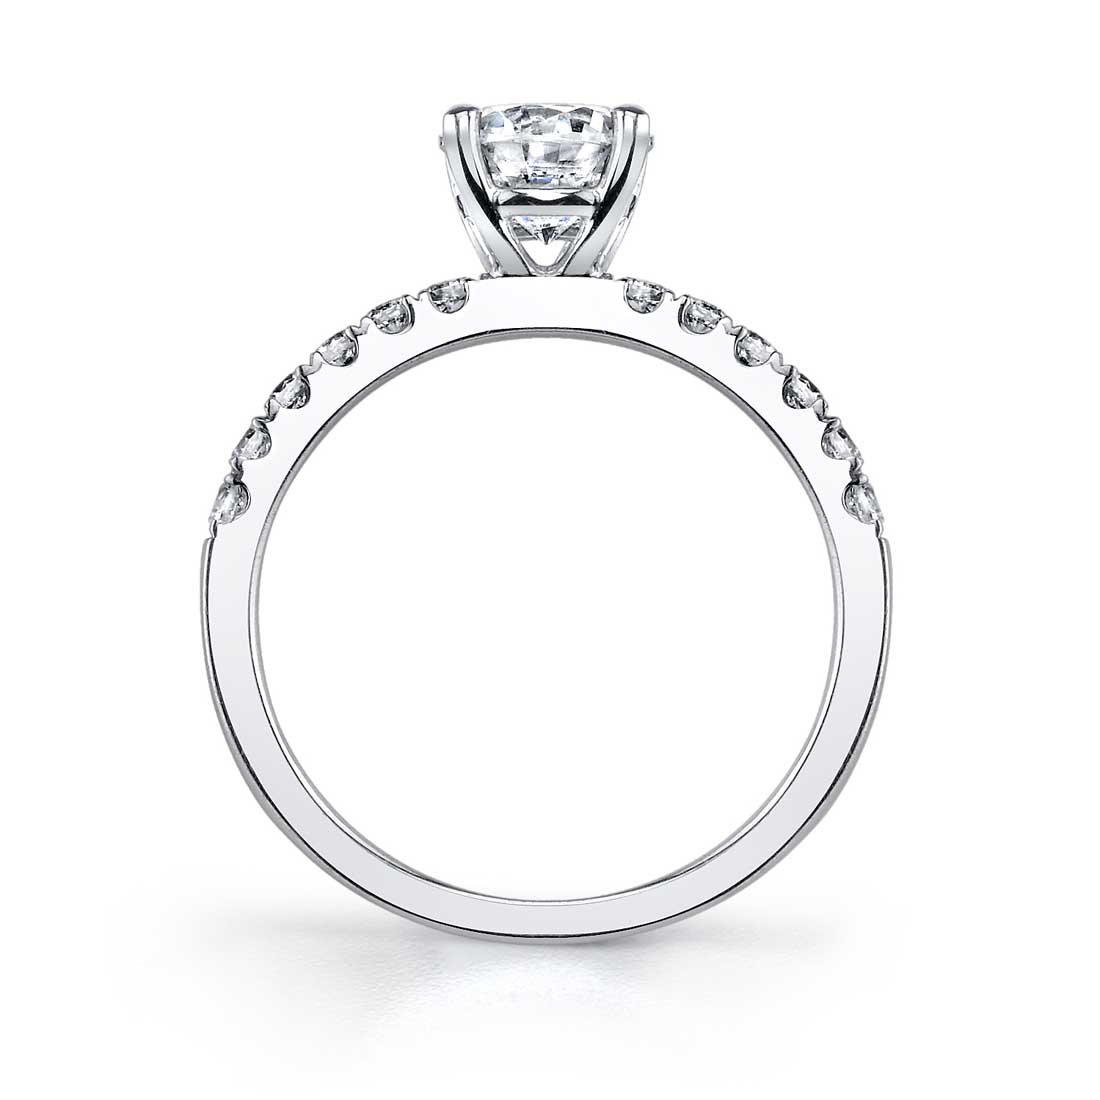 Profile Image of a Round Classic Engagement Ring